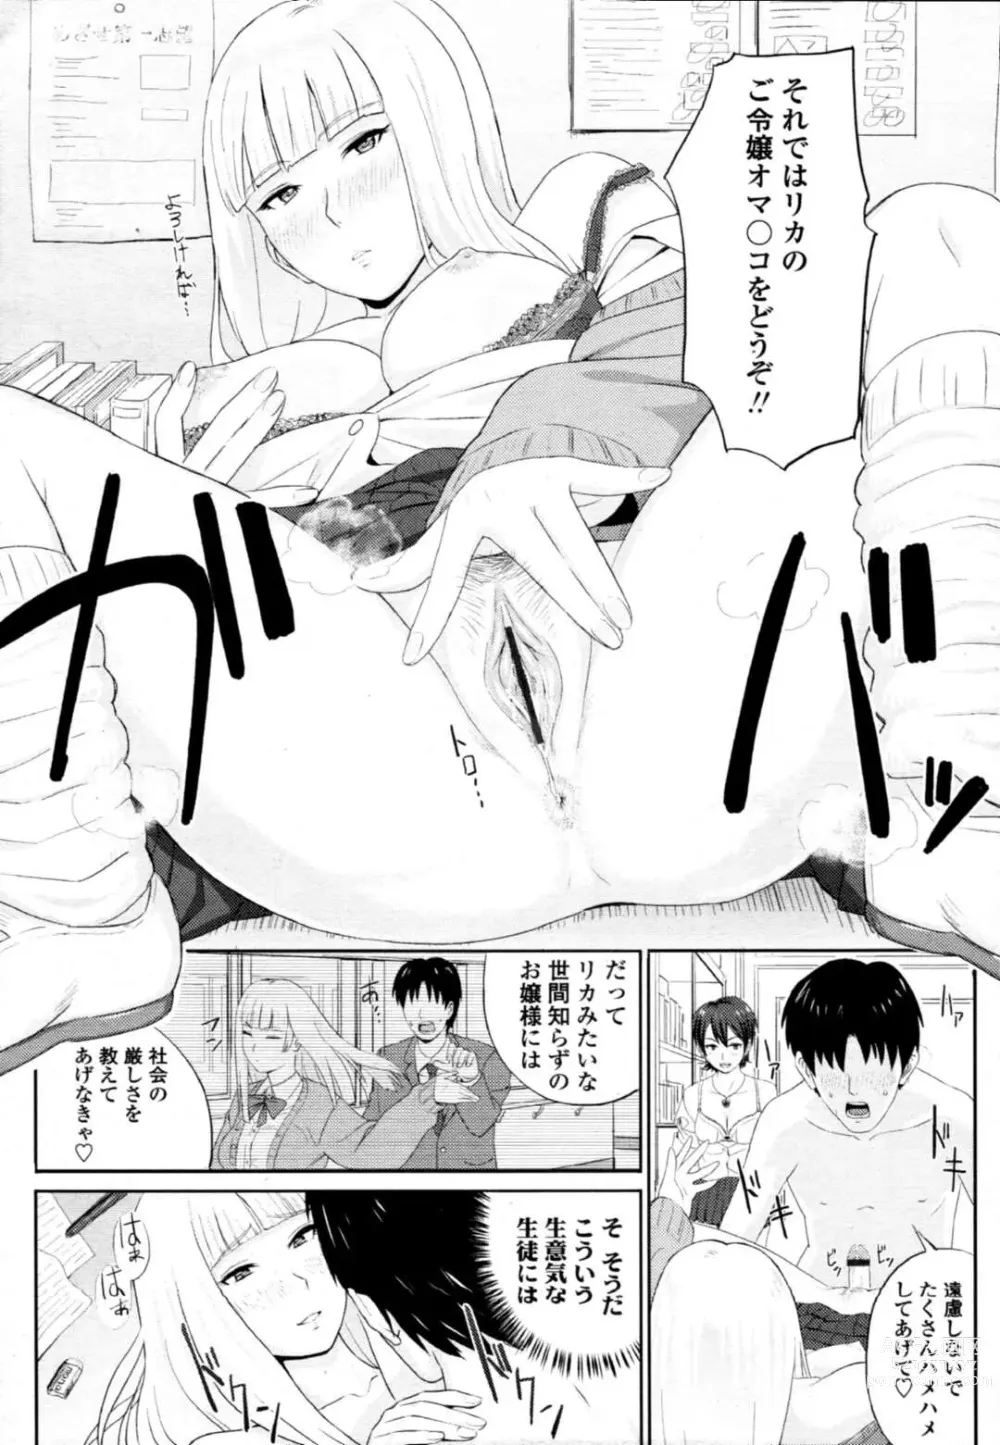 Page 10 of doujinshi Sassy Gal JKs Having Harem Sex with Teachers... Lewd Girls Climax by Letting Him Fuck Them Vaginally and Anally!